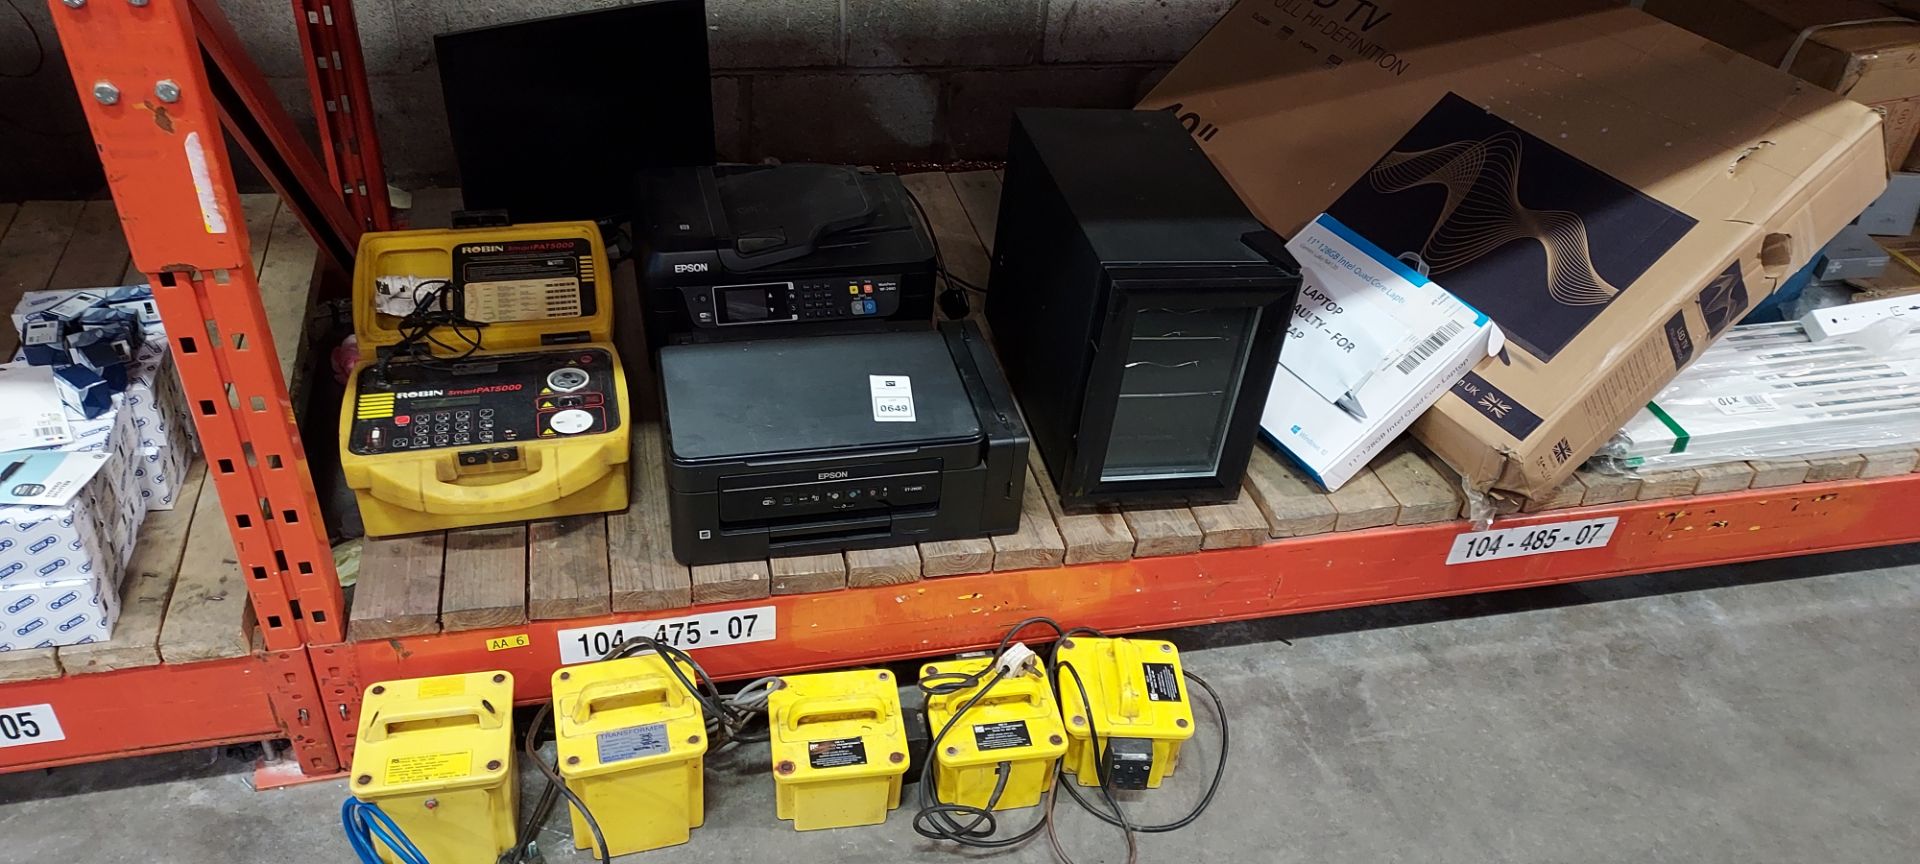 12 X MIXED LOT TO INCLUDE 2X EPSON PRINTERS 1 X40 INCH LED TV WITH SCRATCH, 1X FAULTY QUAD CORE